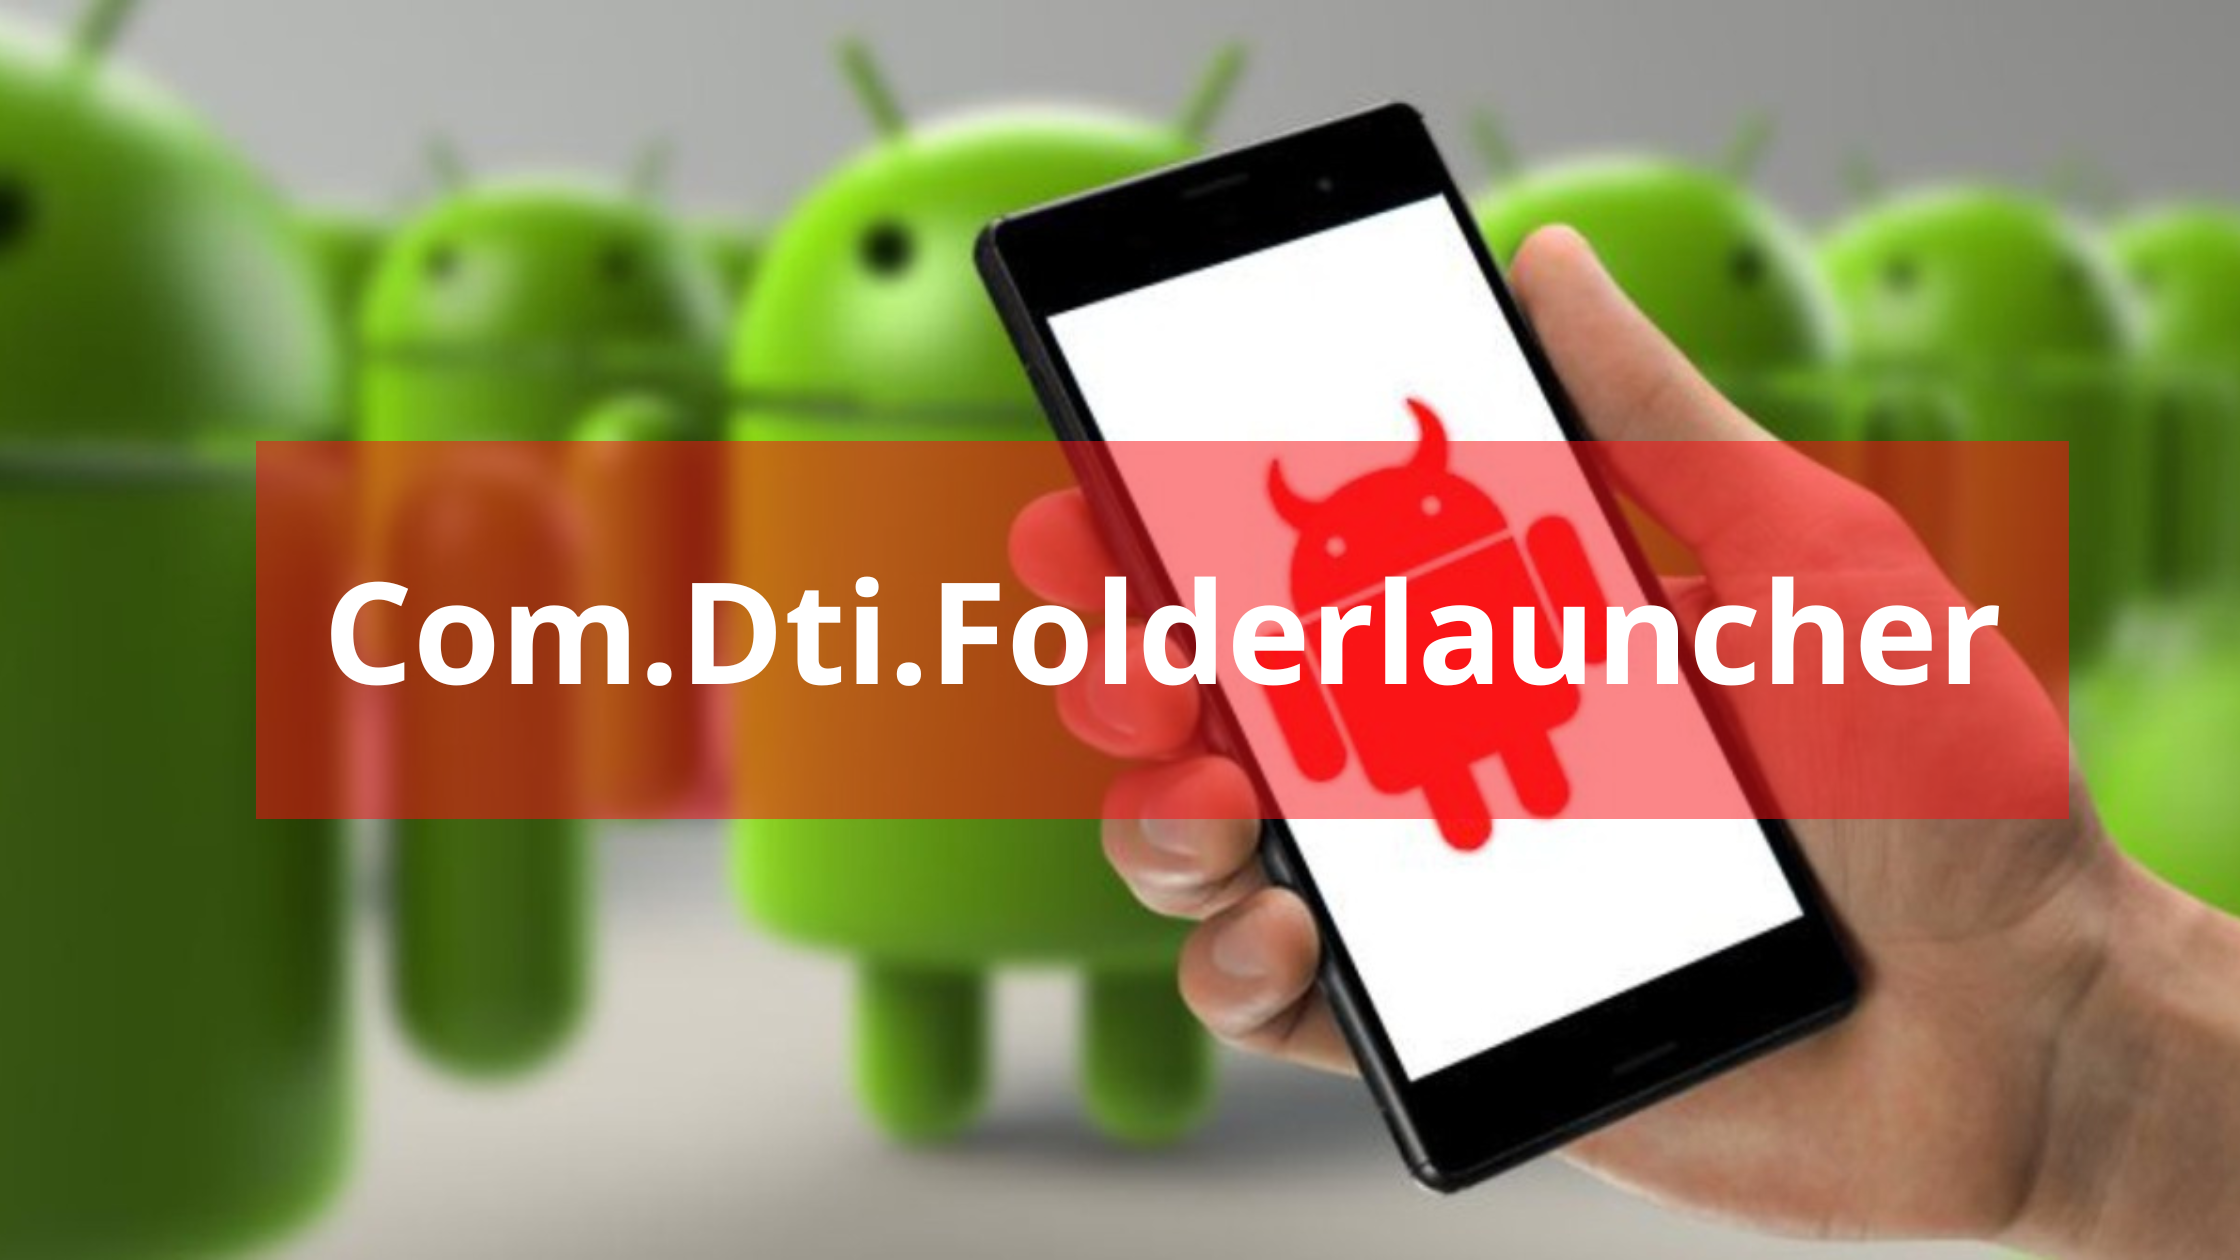 Com Dti Folderlauncher App (com.dti.folderlauncher): The Ultimate Tool for Organizing Your Files